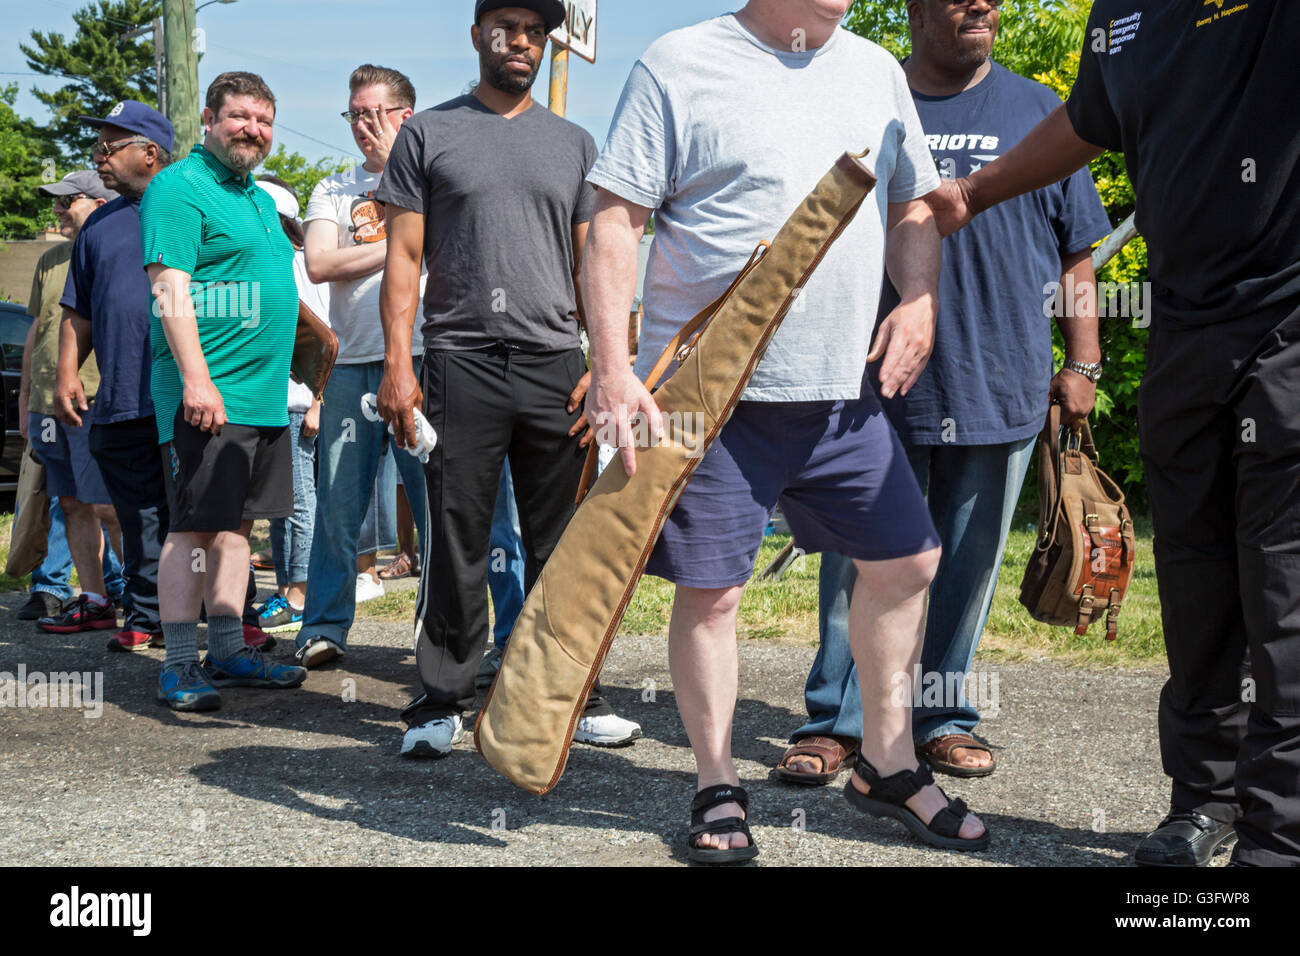 Detroit, Michigan USA - 11th June 2016 - People turn in old guns as the Wayne County sheriff offers $50 with no questions asked for each weapon surrendered. Credit:  Jim West/Alamy Live News Stock Photo